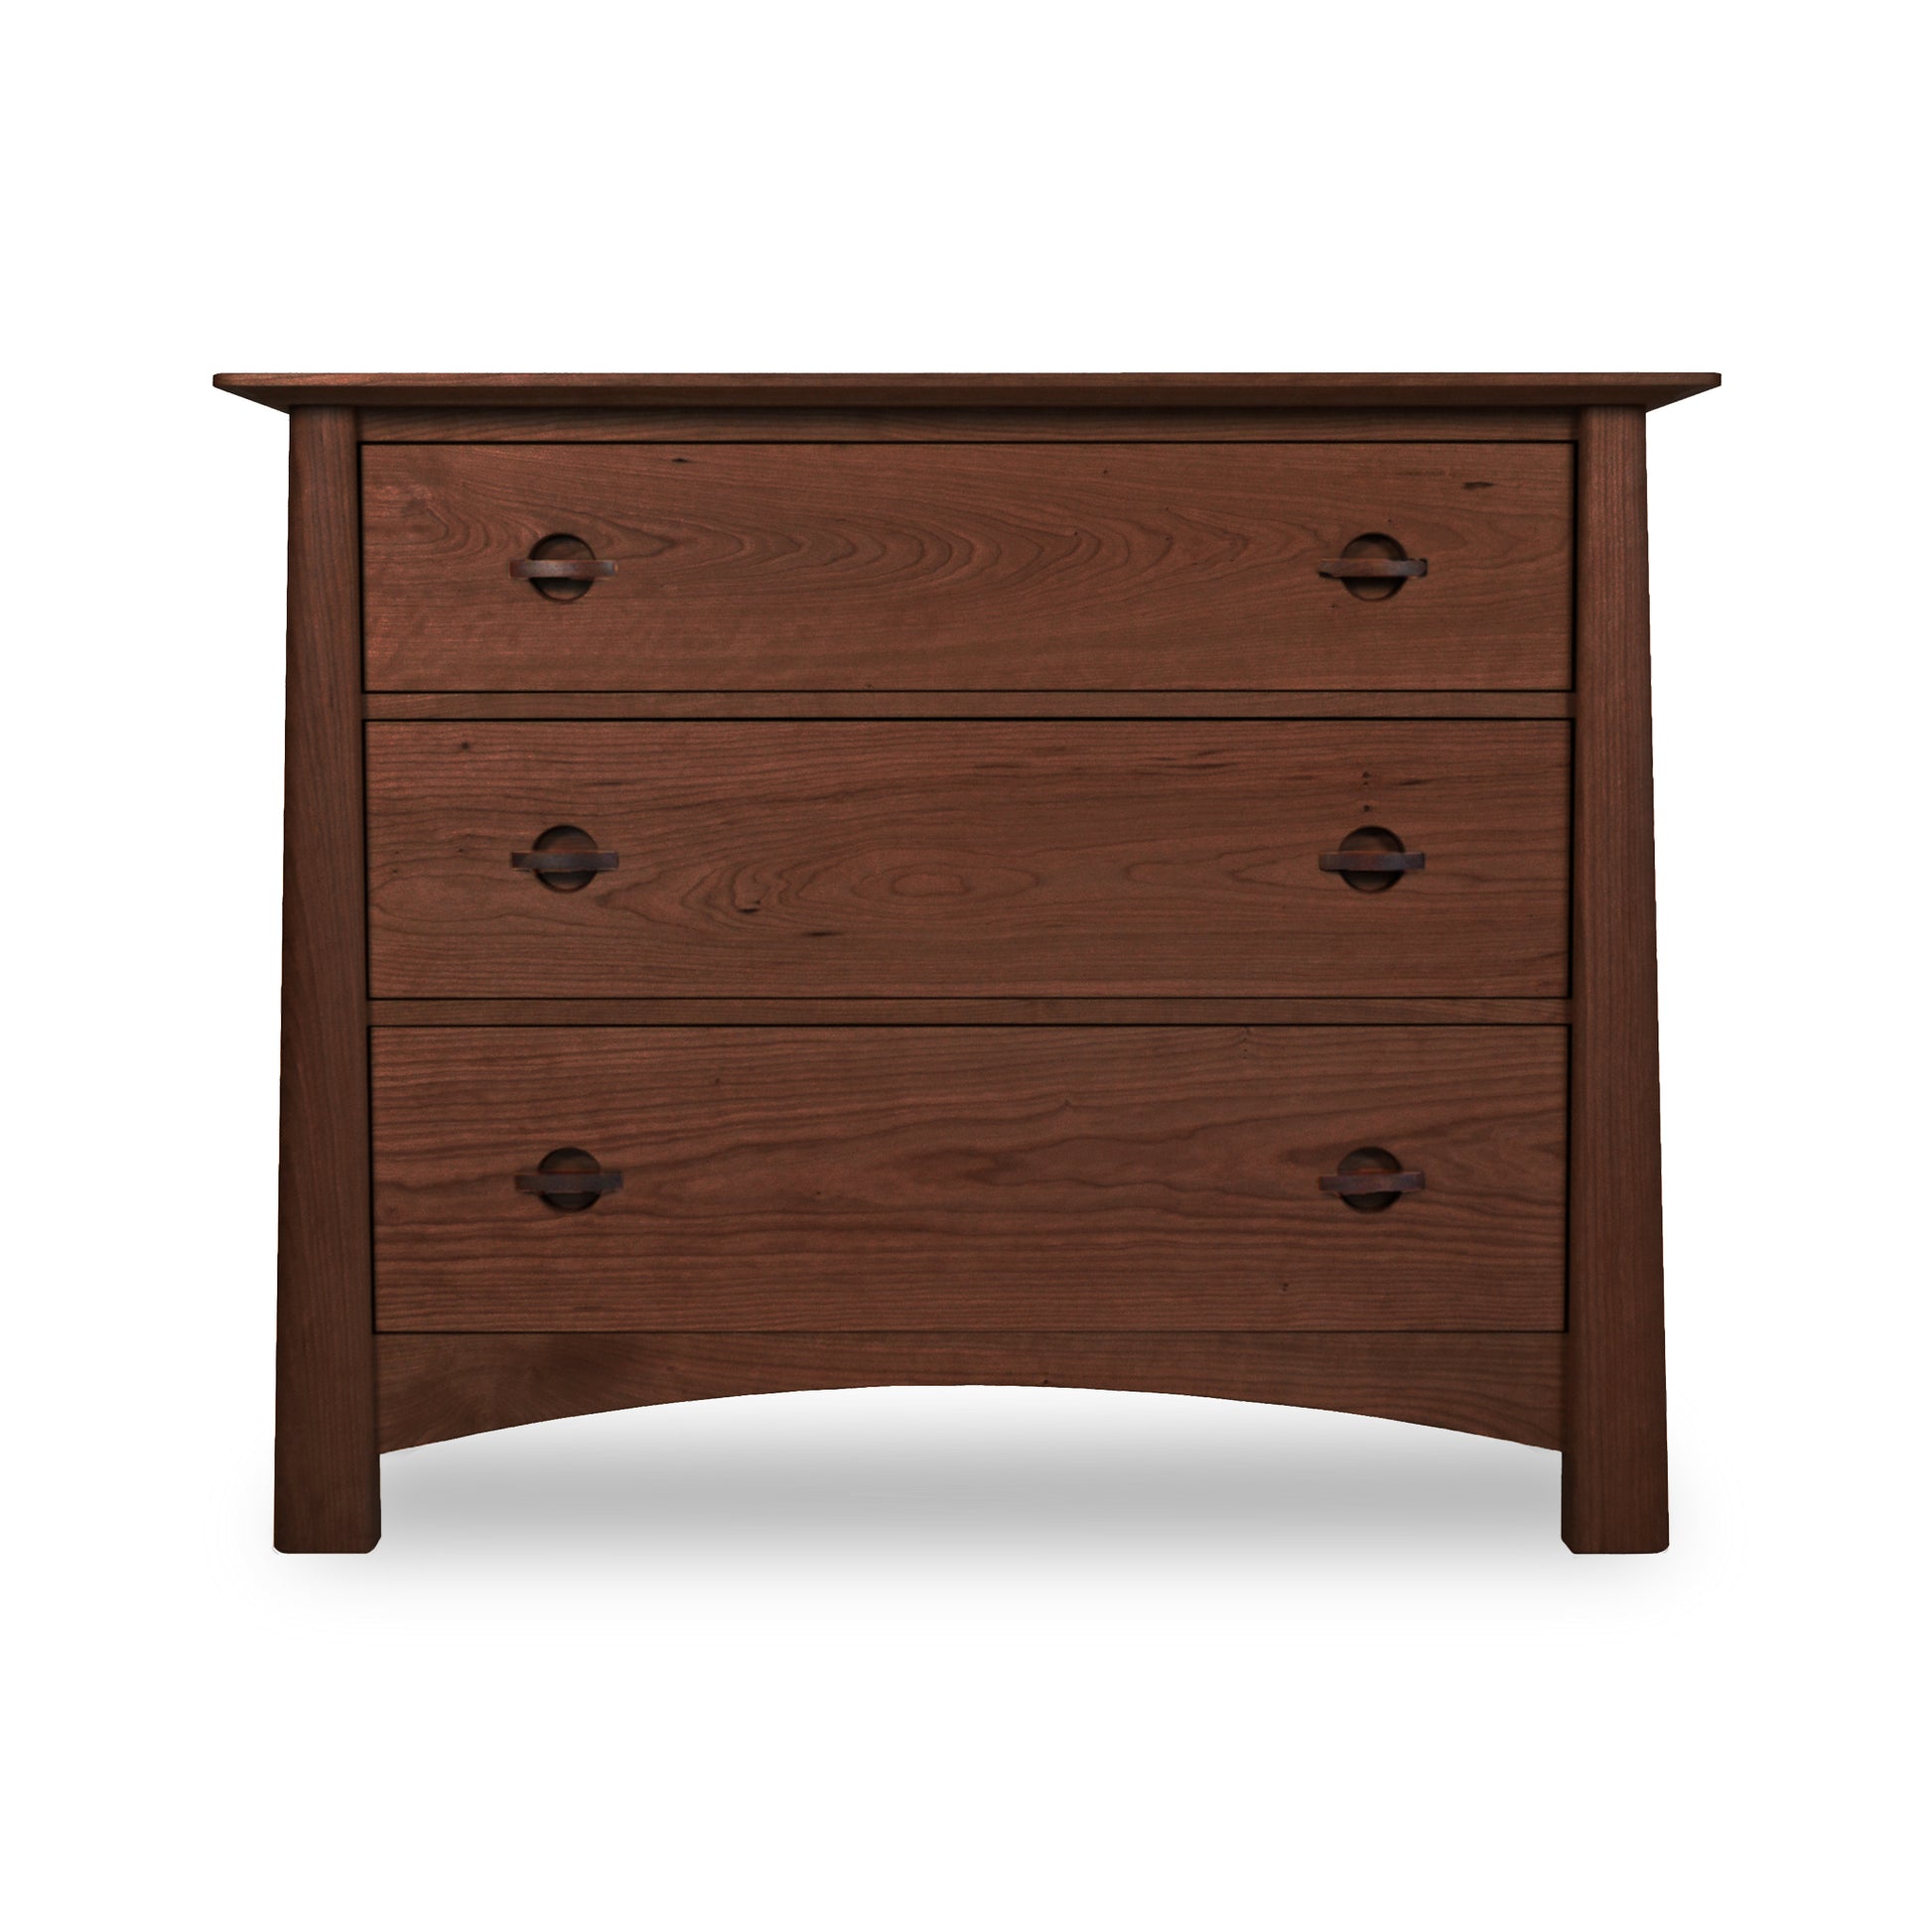 A Cherry Moon 3-Drawer Chest by Maple Corner Woodworks with three storage space drawers made of natural hardwoods on a white background.